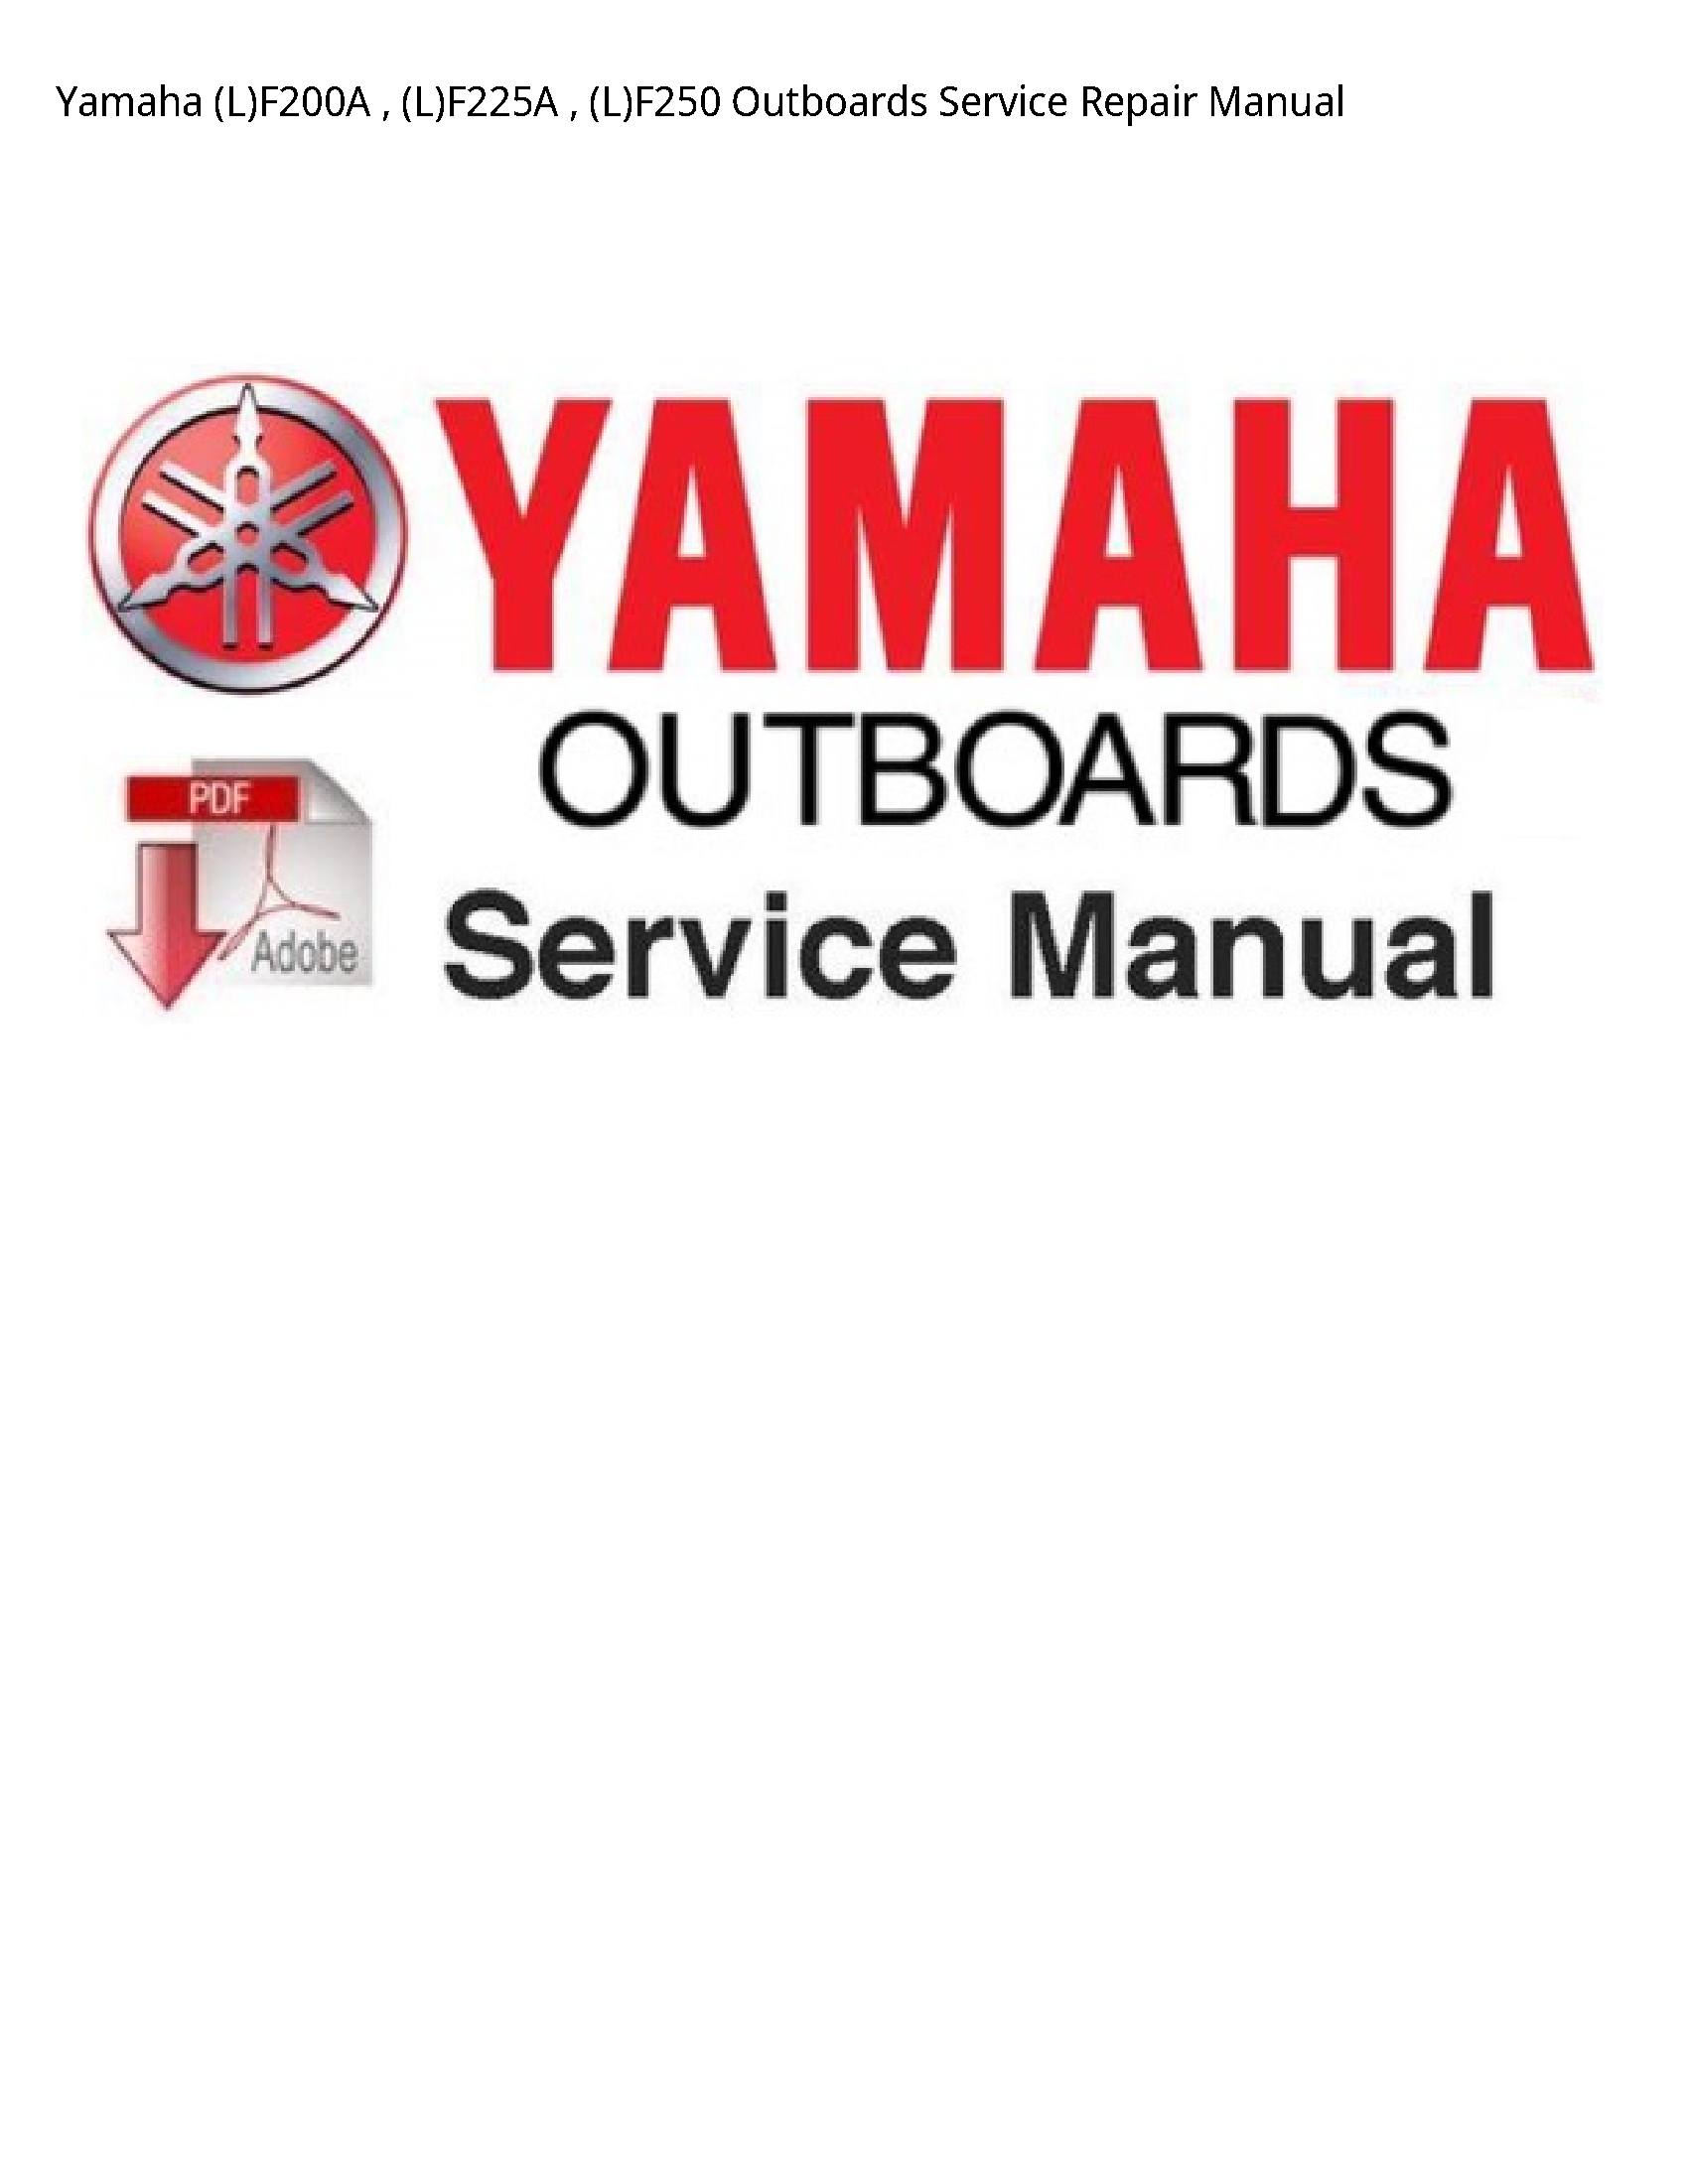 Yamaha (L)F200A Outboards manual